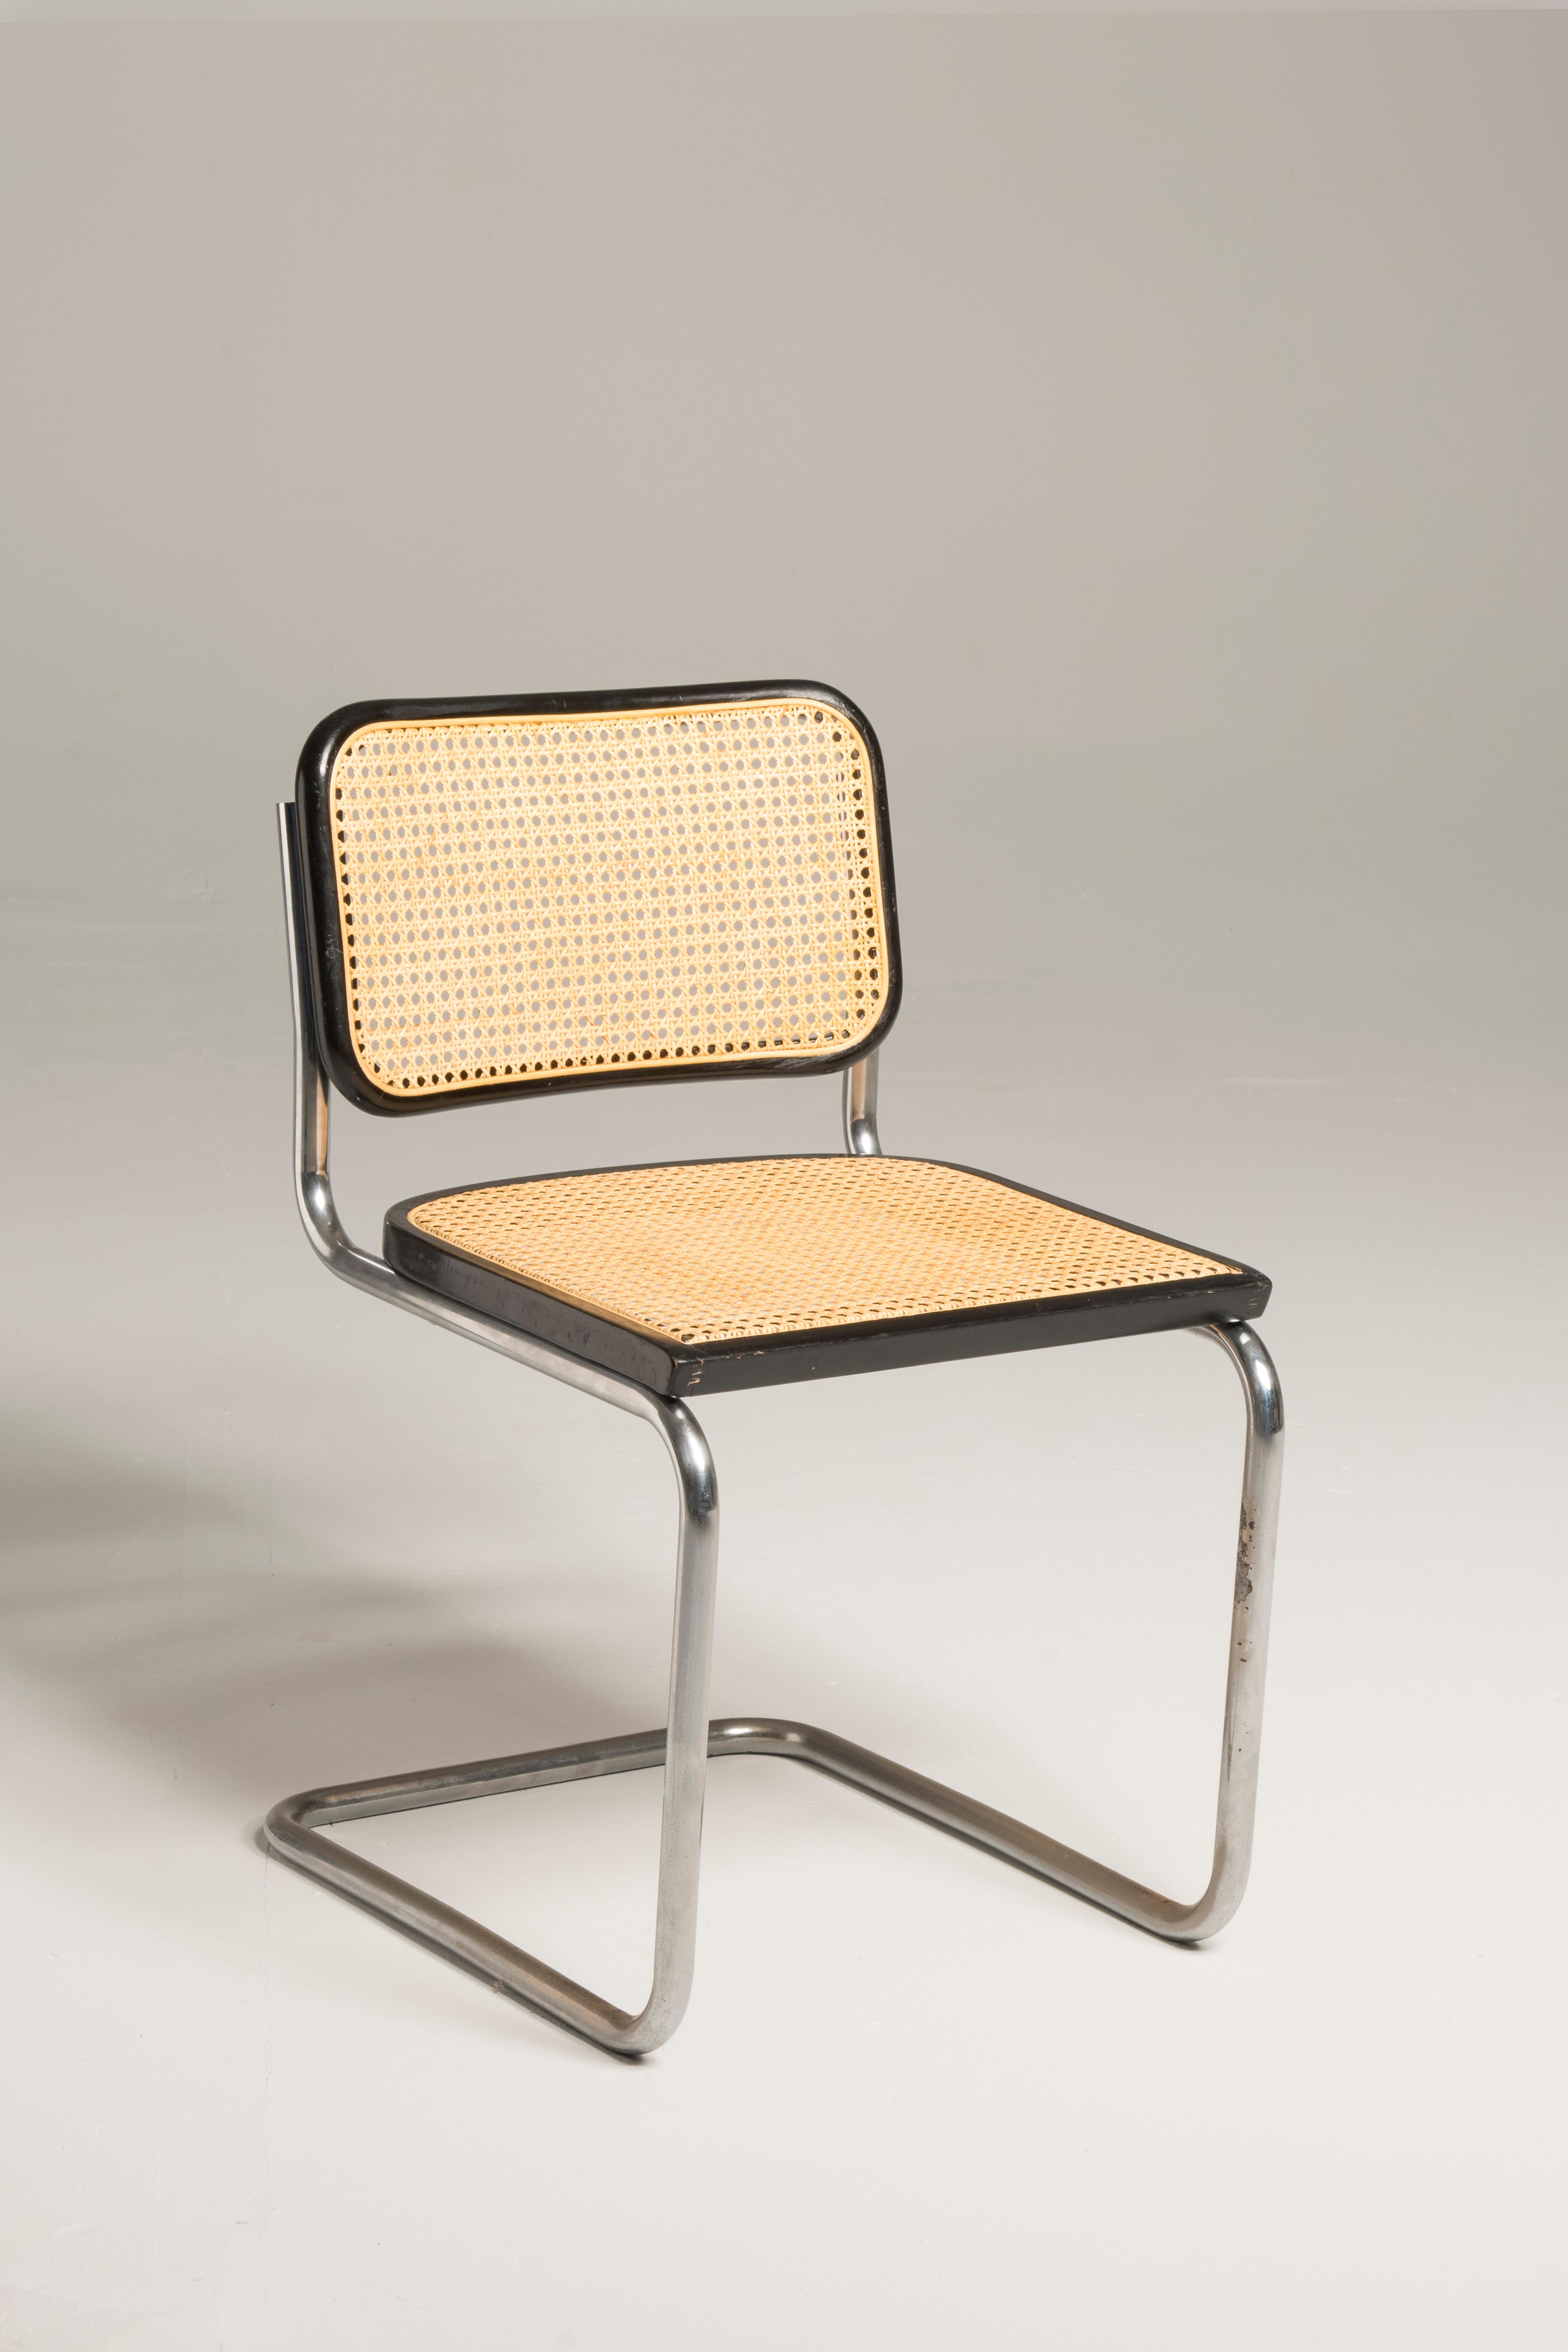 Marcel Breuer Cesca chairs for Knoll Production, 18 chairs available. Group of 18 can be divided into smaller ones.
Cesca chair model n B 32, was designed in 1928 by Marcel Breuer, using tubular steel according to the Bauhaus ideology. In 1928, it